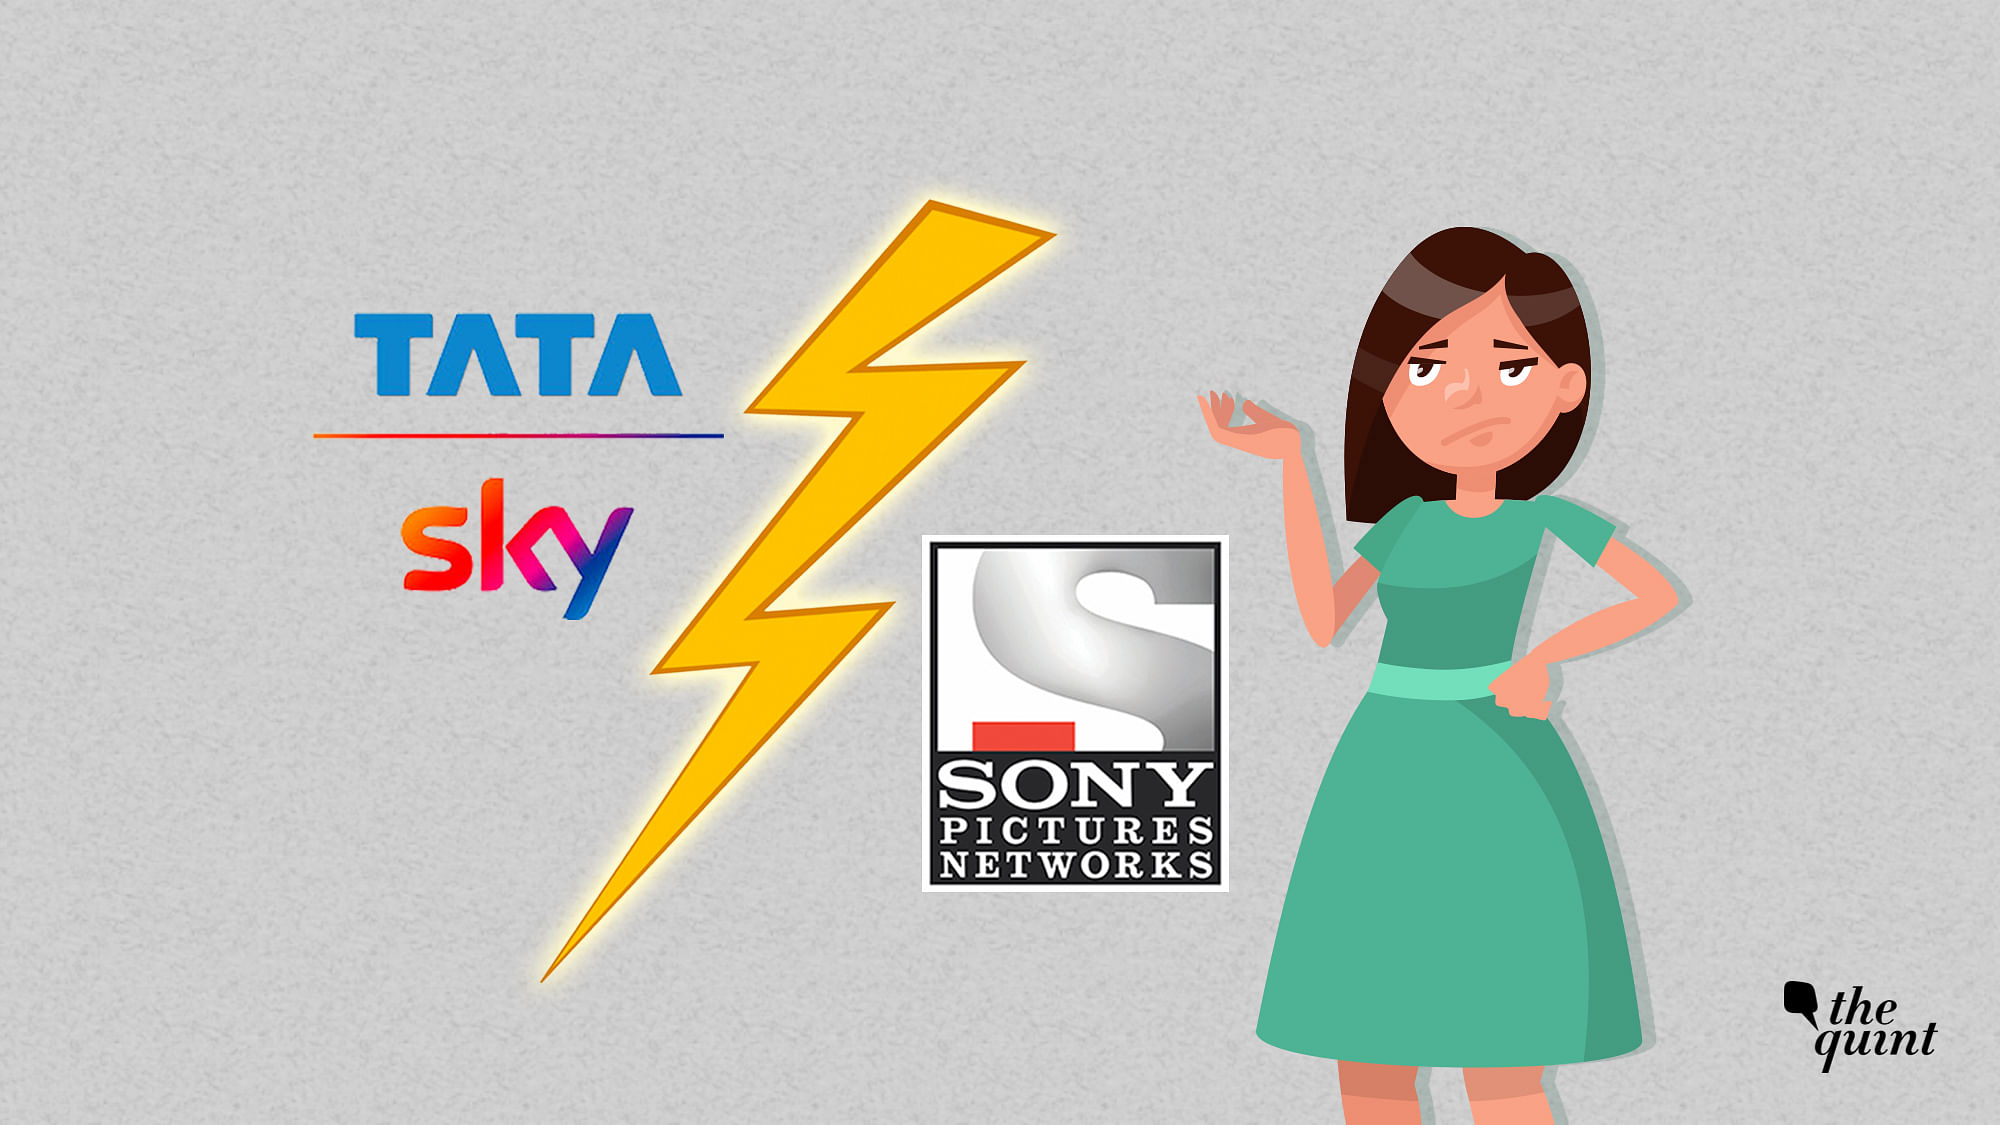 Tata Sky has removed 22 channels of Sony Pictures Networks in India.